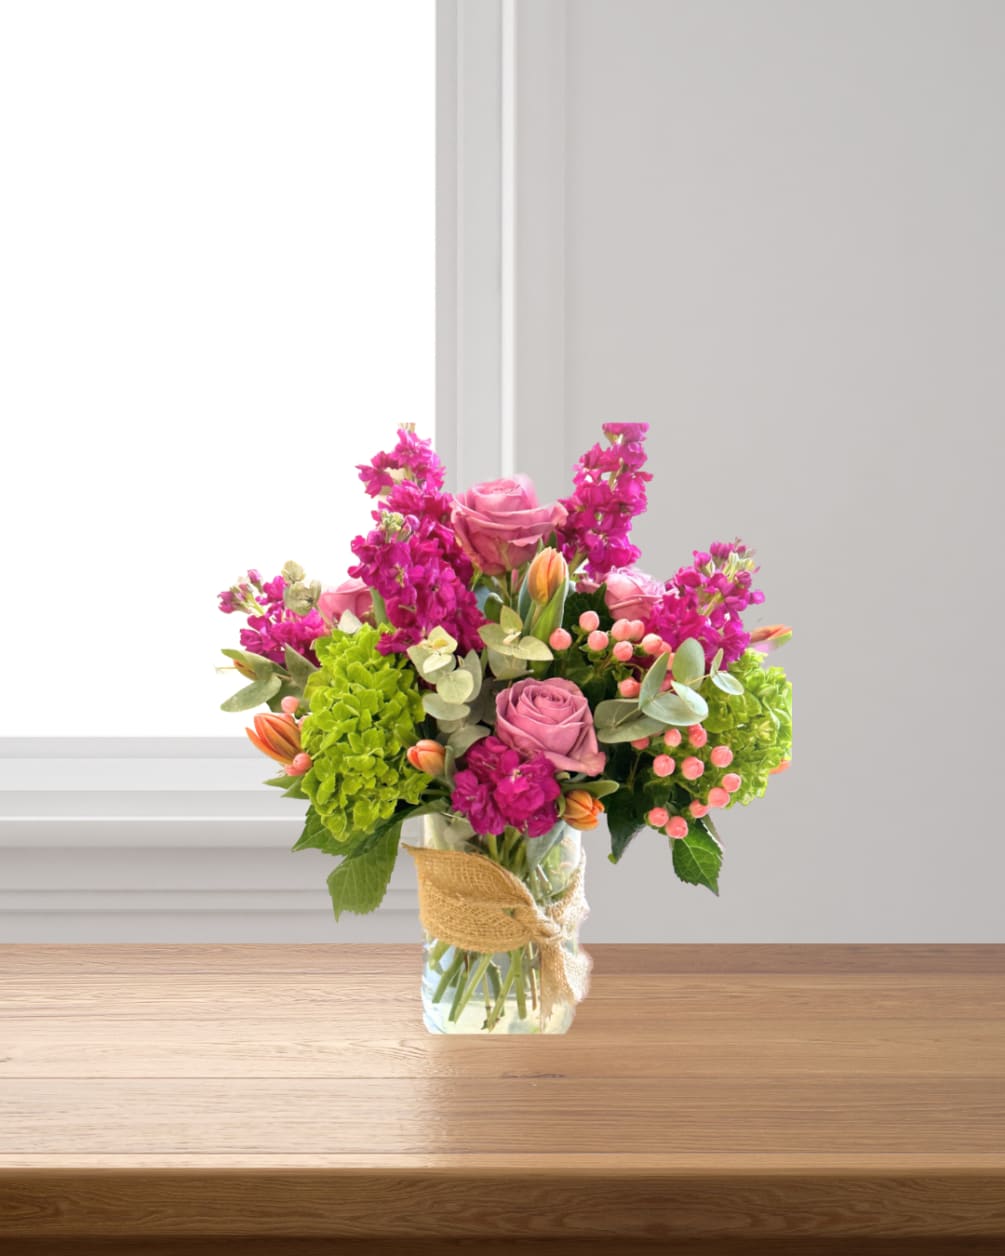 Lavendar roses, Pink Stock, Hydrangea, Tulips and Eucalpytus and hypericum berries. This